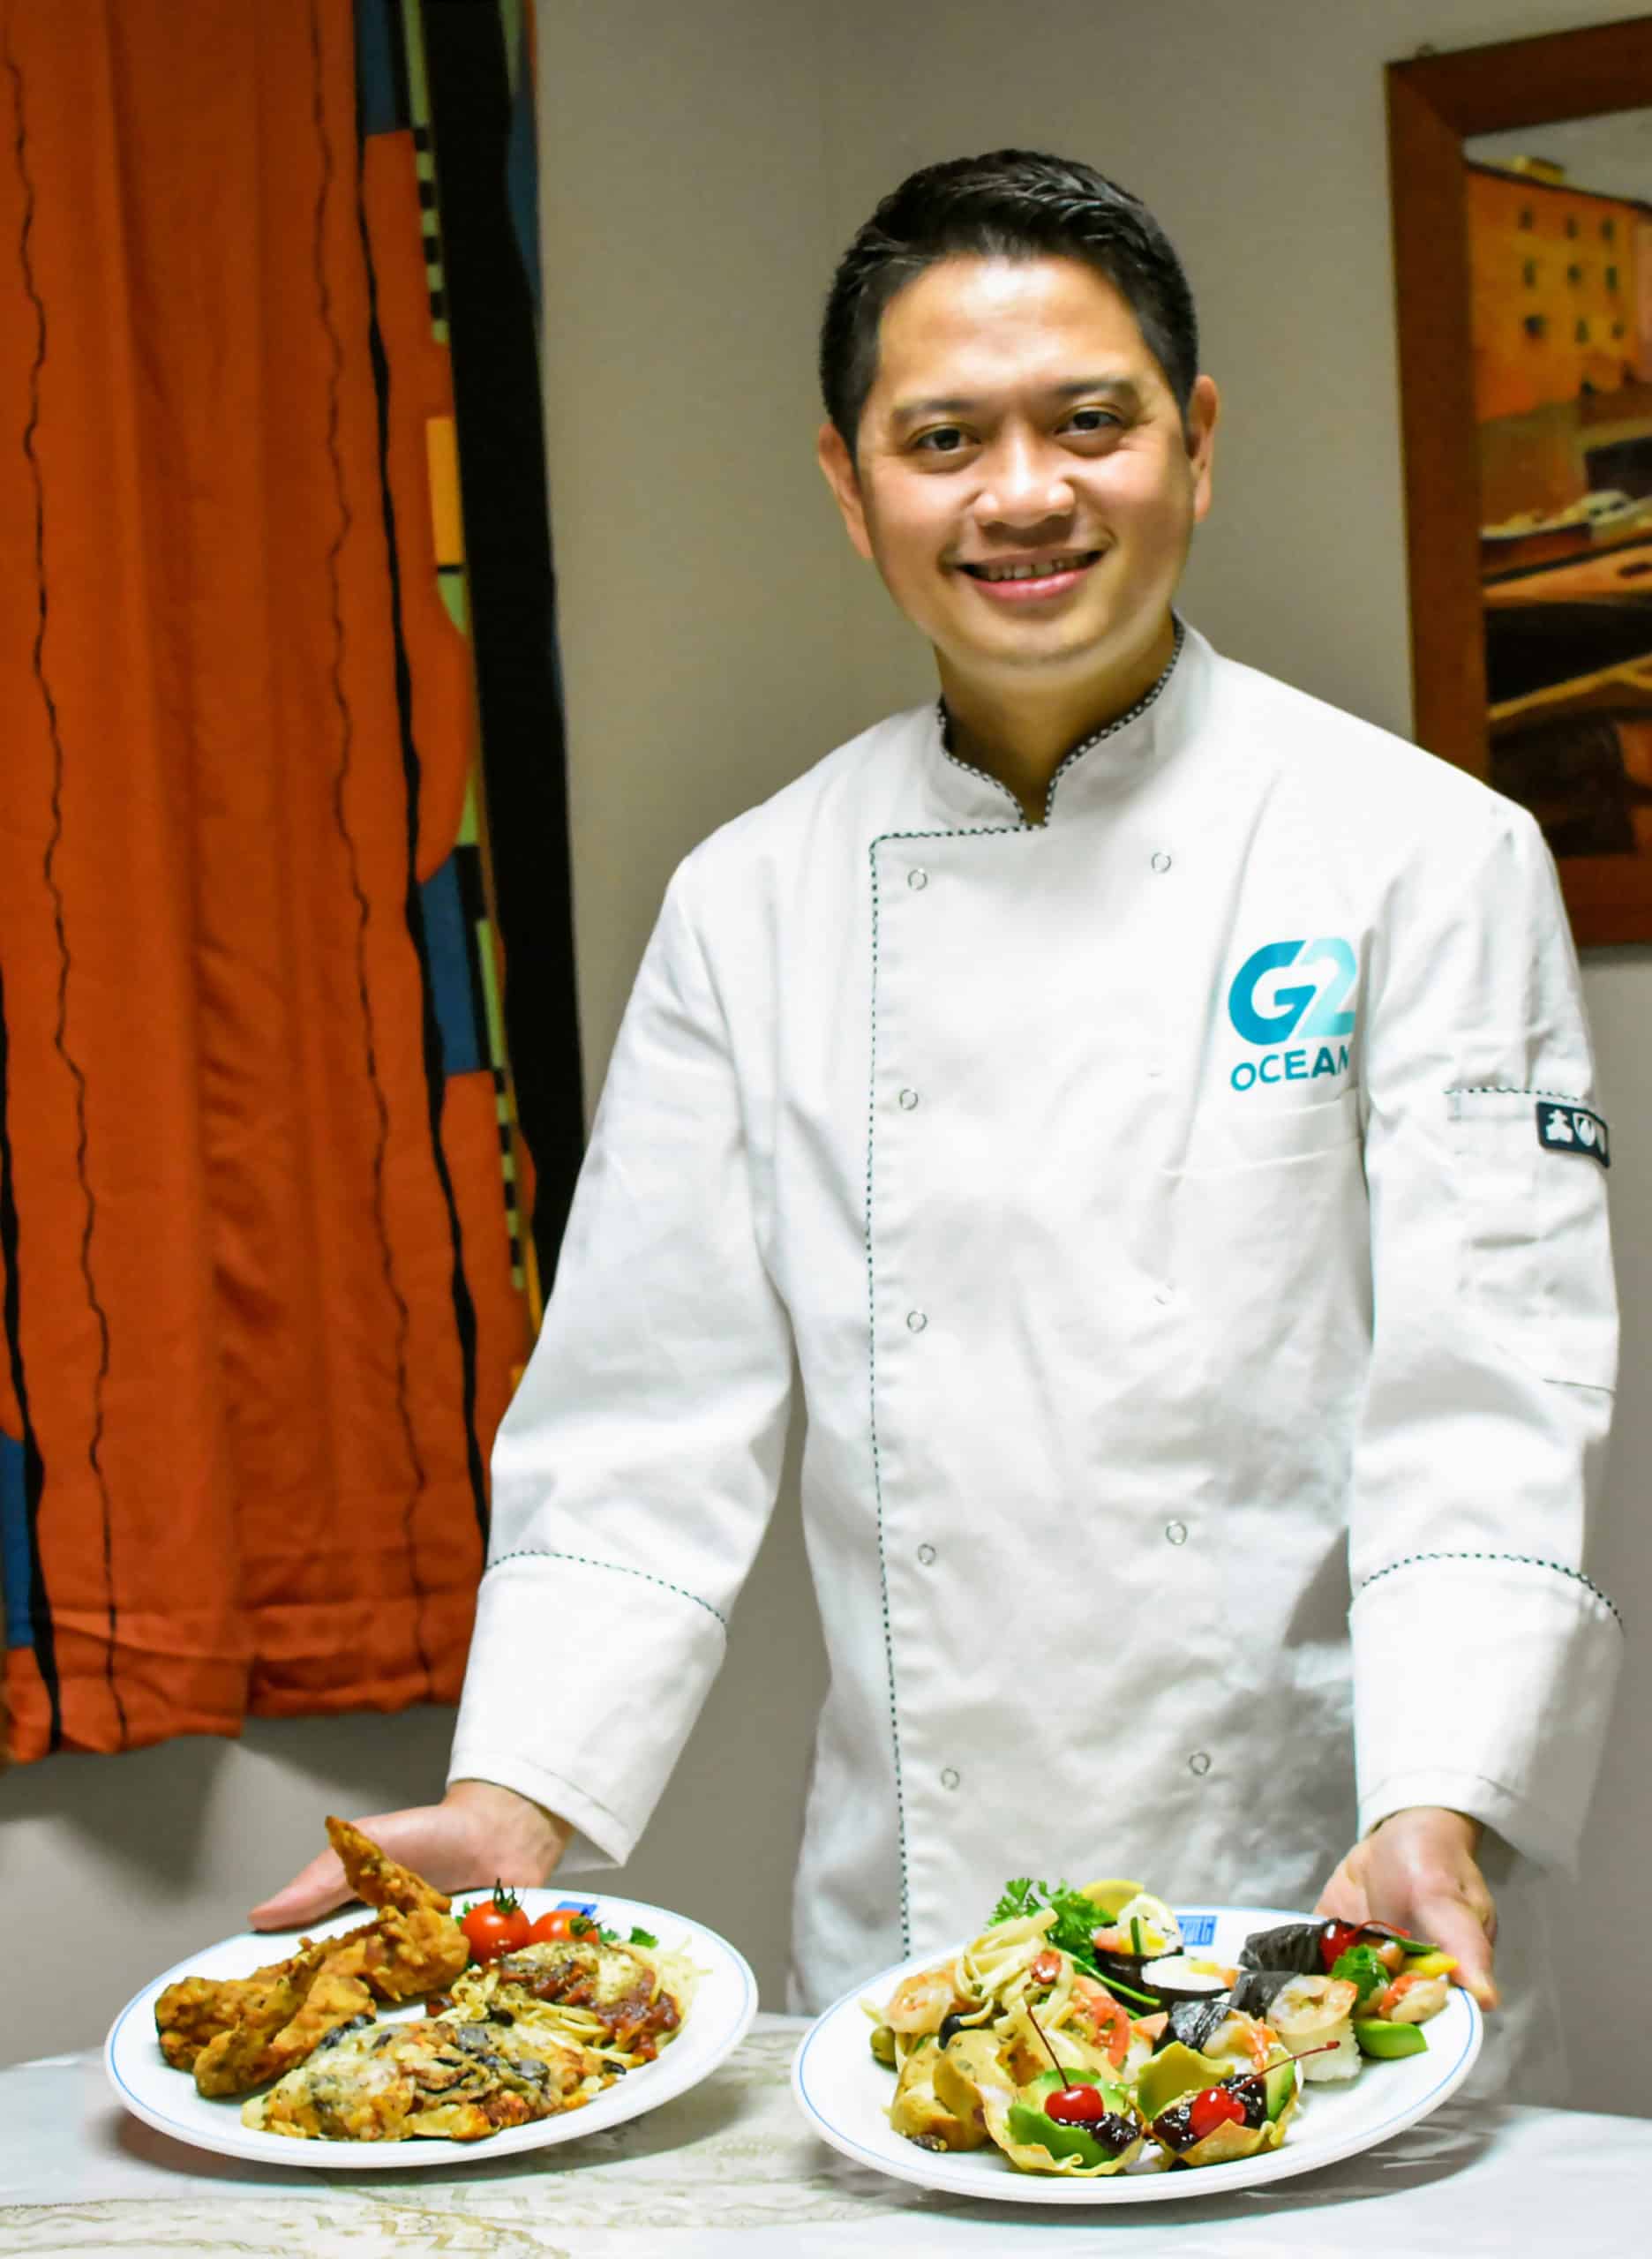 Filipino employee with two plates of food. Employee in G2 Ocean uniform working as Chief Cook.